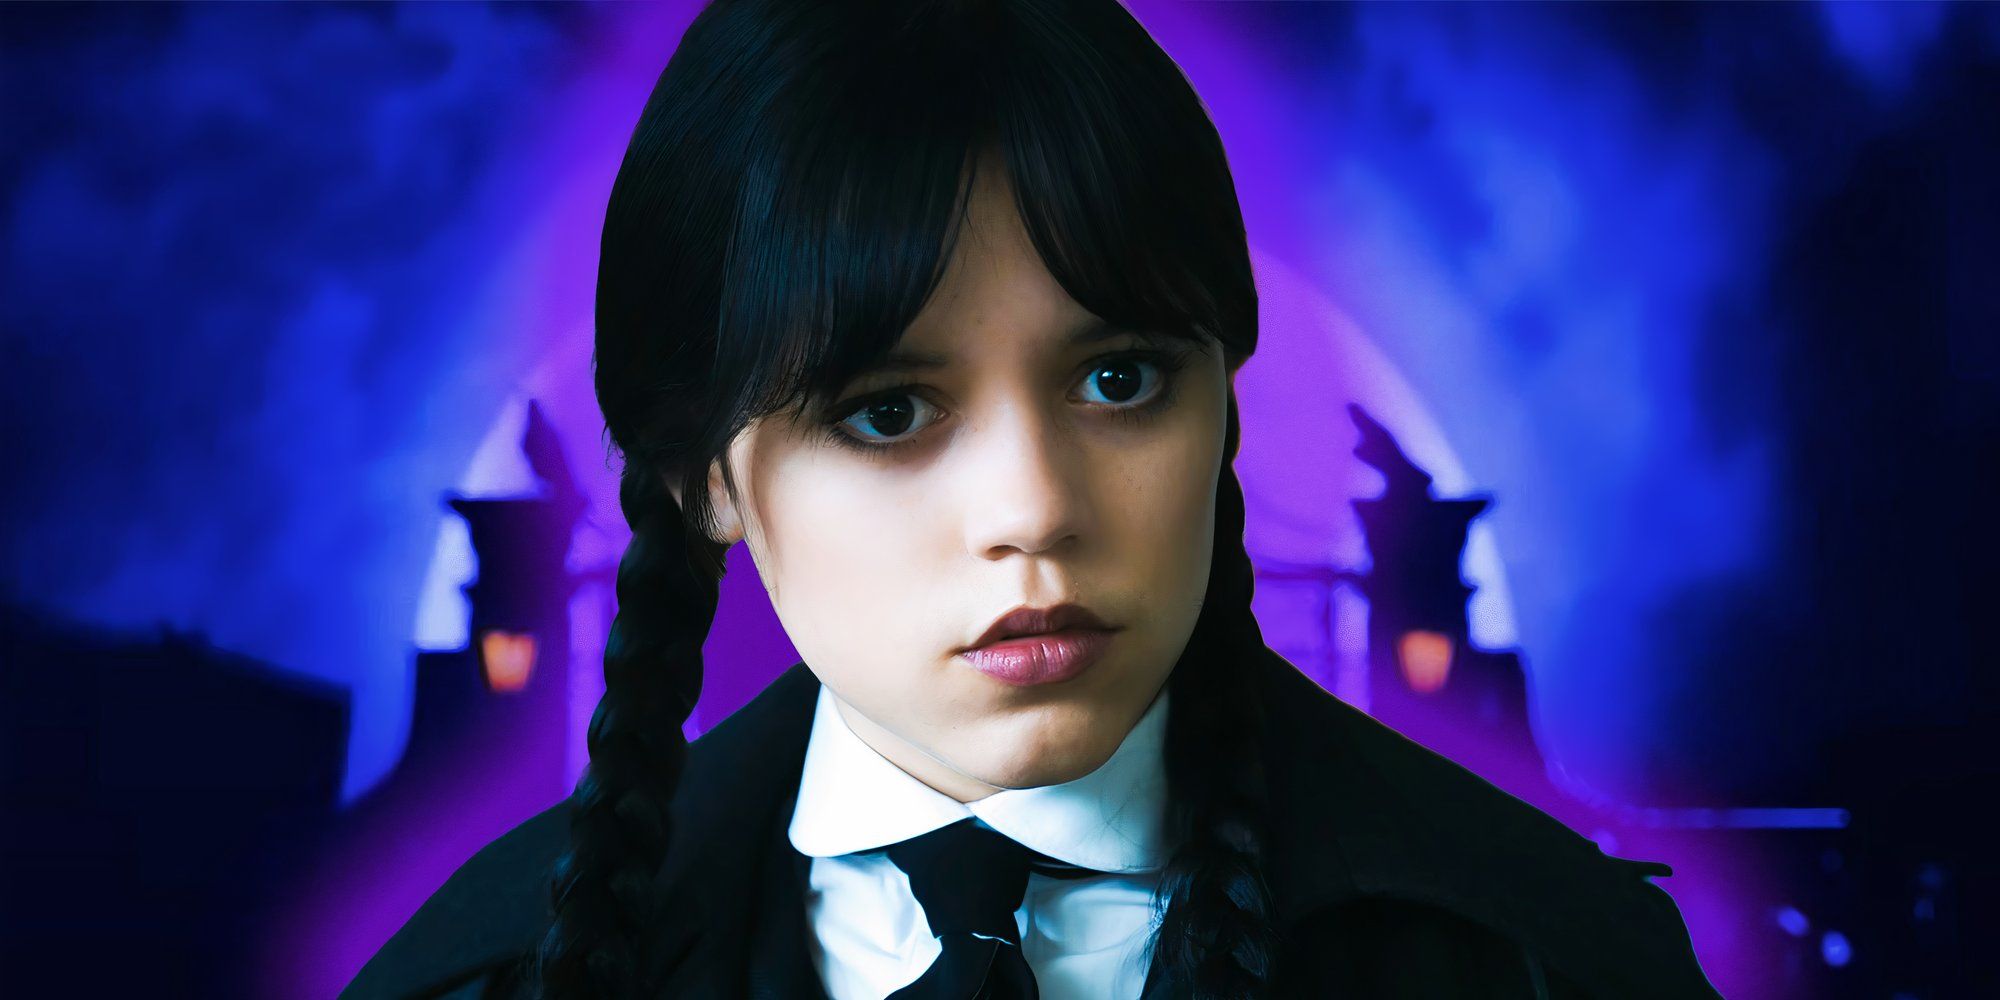 Jenna Ortega as Wednesday Addams in Wednesday season 1 with Nevermore in background